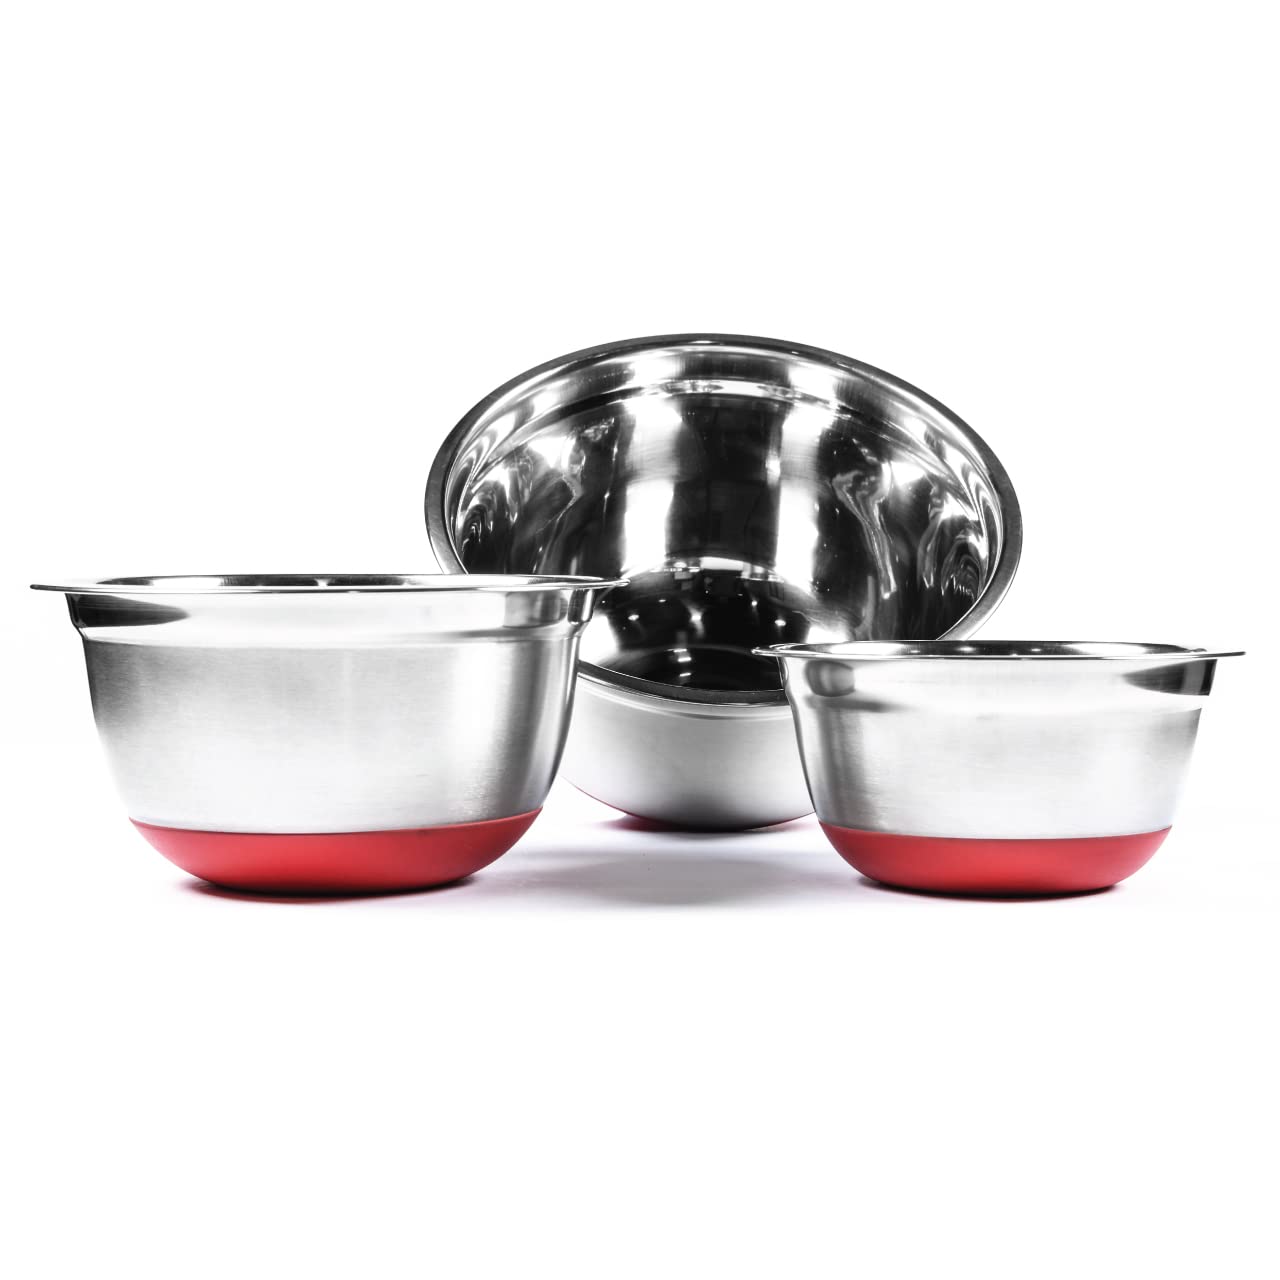 STONE CLAY Stainless Steel Mixing Bowl Set - Set of 3 Metal Nesting Bowls with Silicone Base for Cooking Baking Food Prep